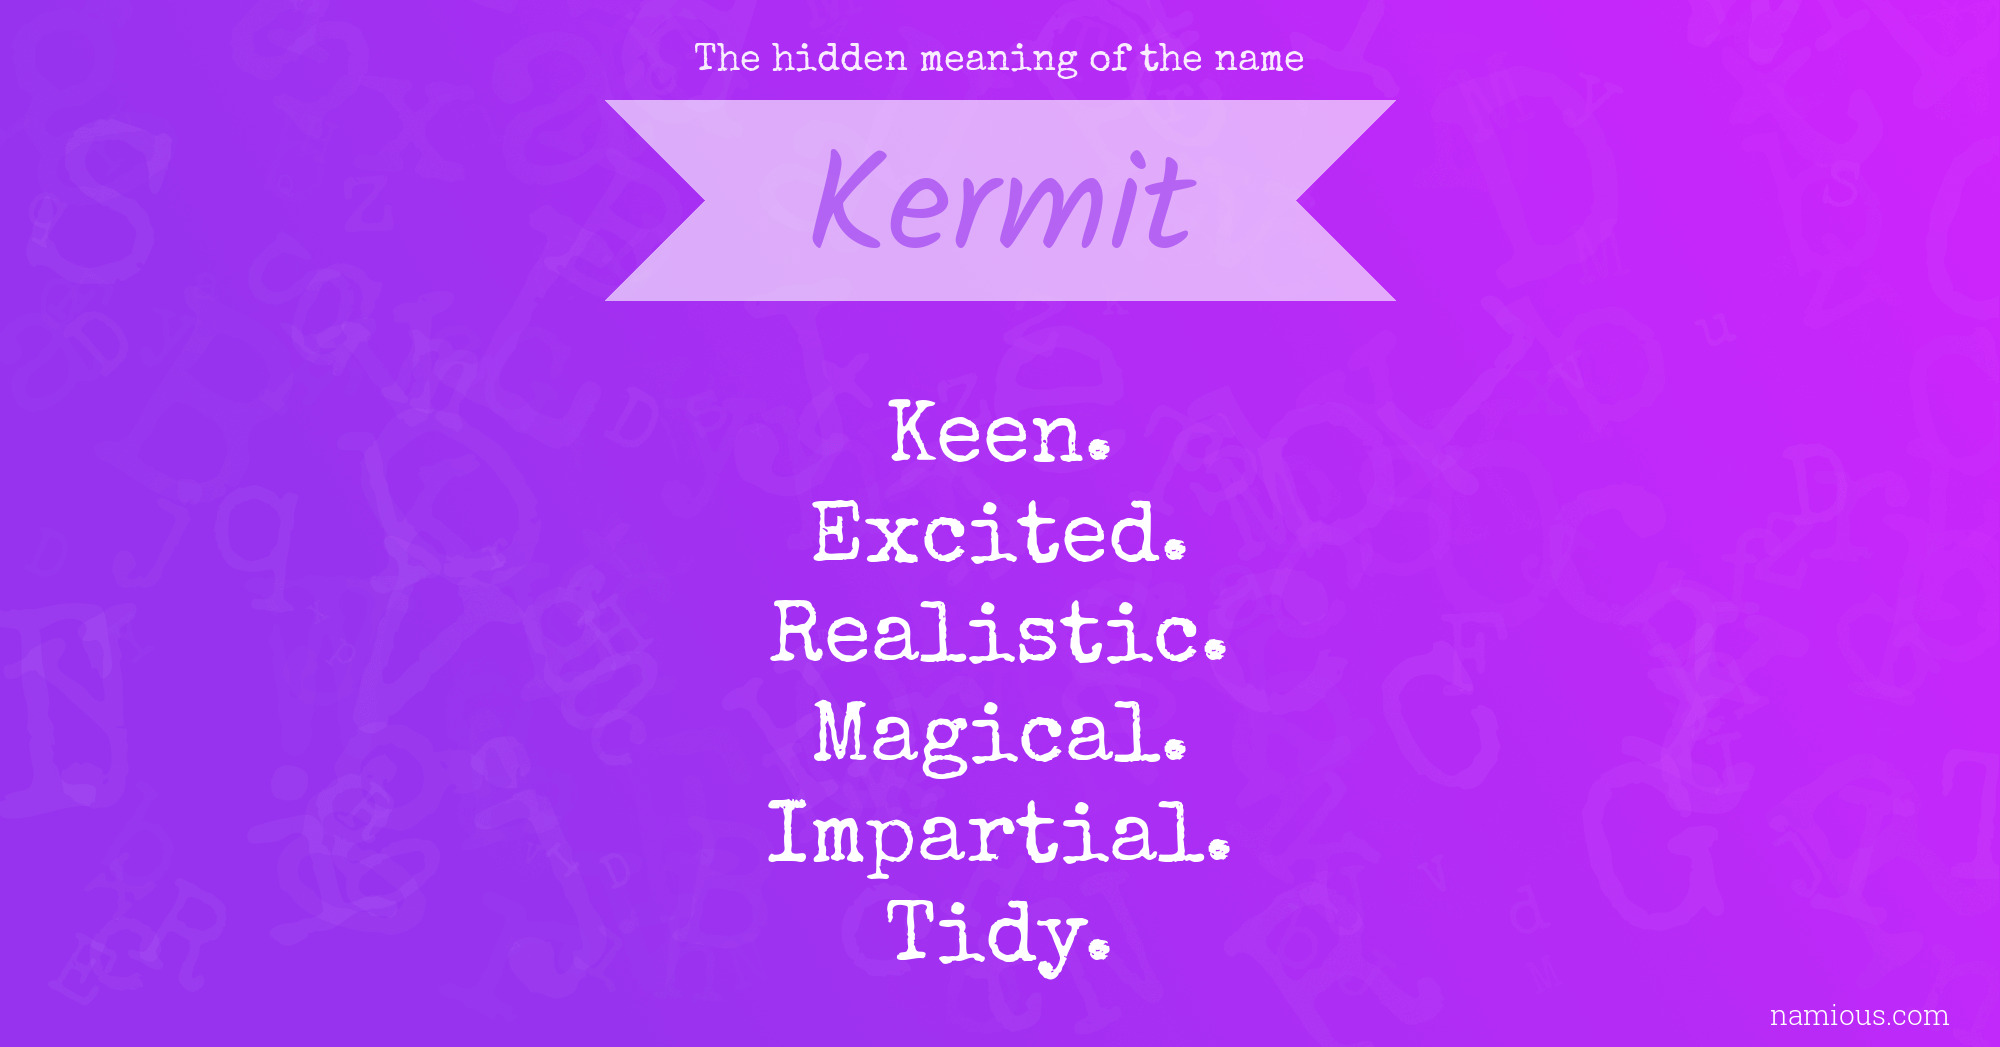 The hidden meaning of the name Kermit